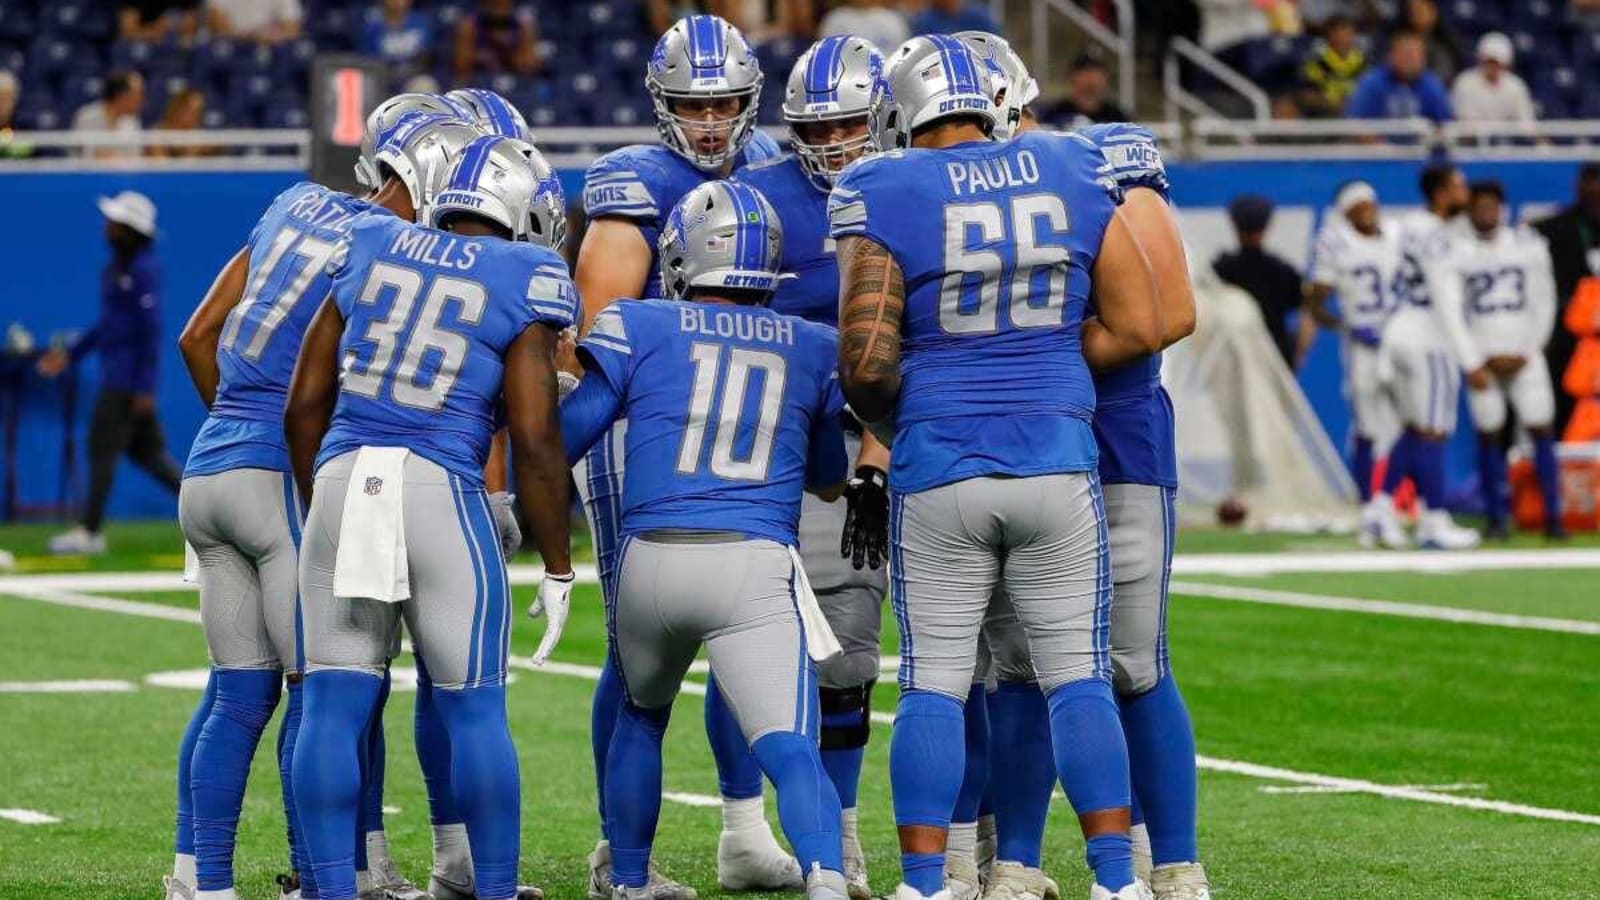 This Lions player could be in line to be a coach in the NFL someday soon